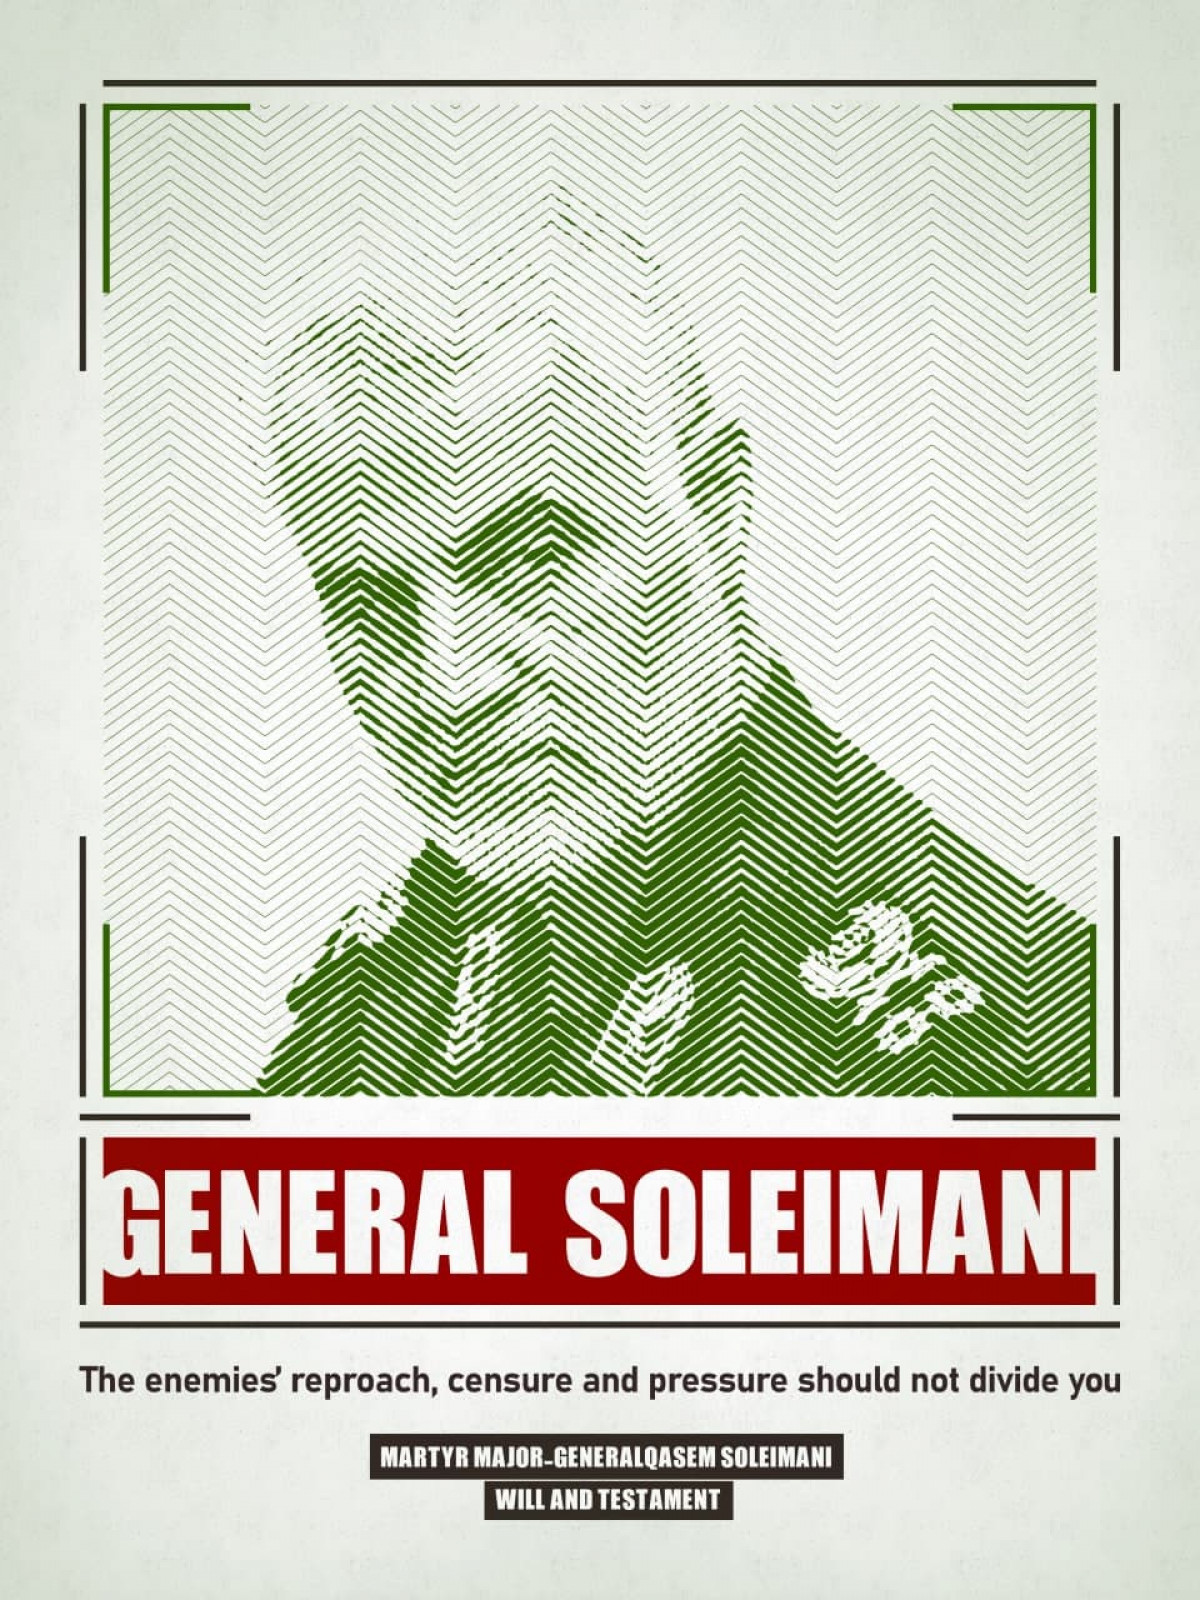 General soleimani:The enemies' reproach, censure and pressure should not divide you